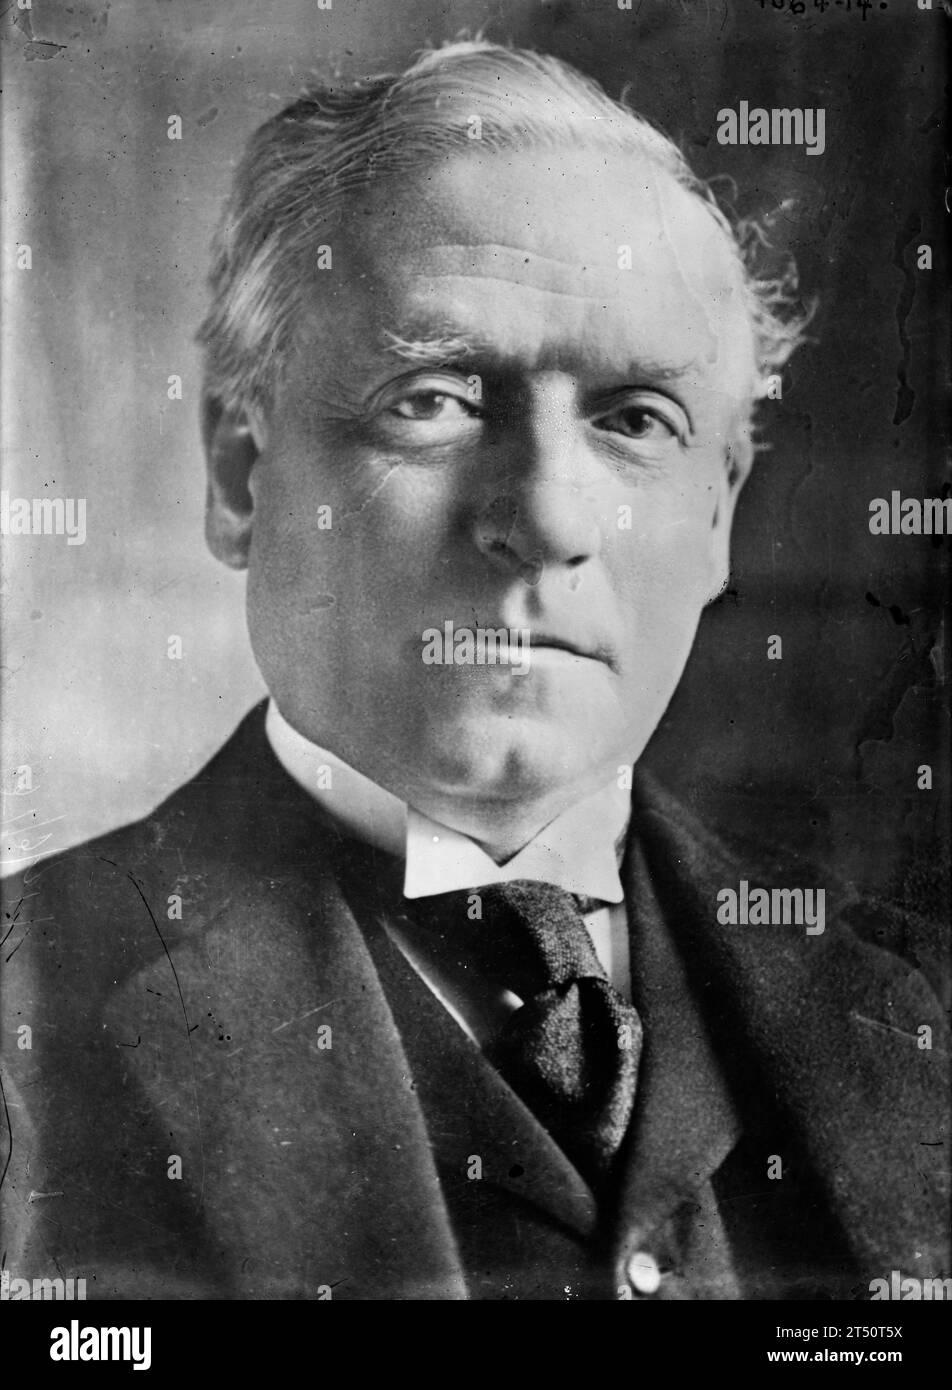 H.H. Asquith.  Herbert Henry Asquith, 1st Earl of Oxford and Asquith, who was the British Prime Minister 1908-1916. Stock Photo